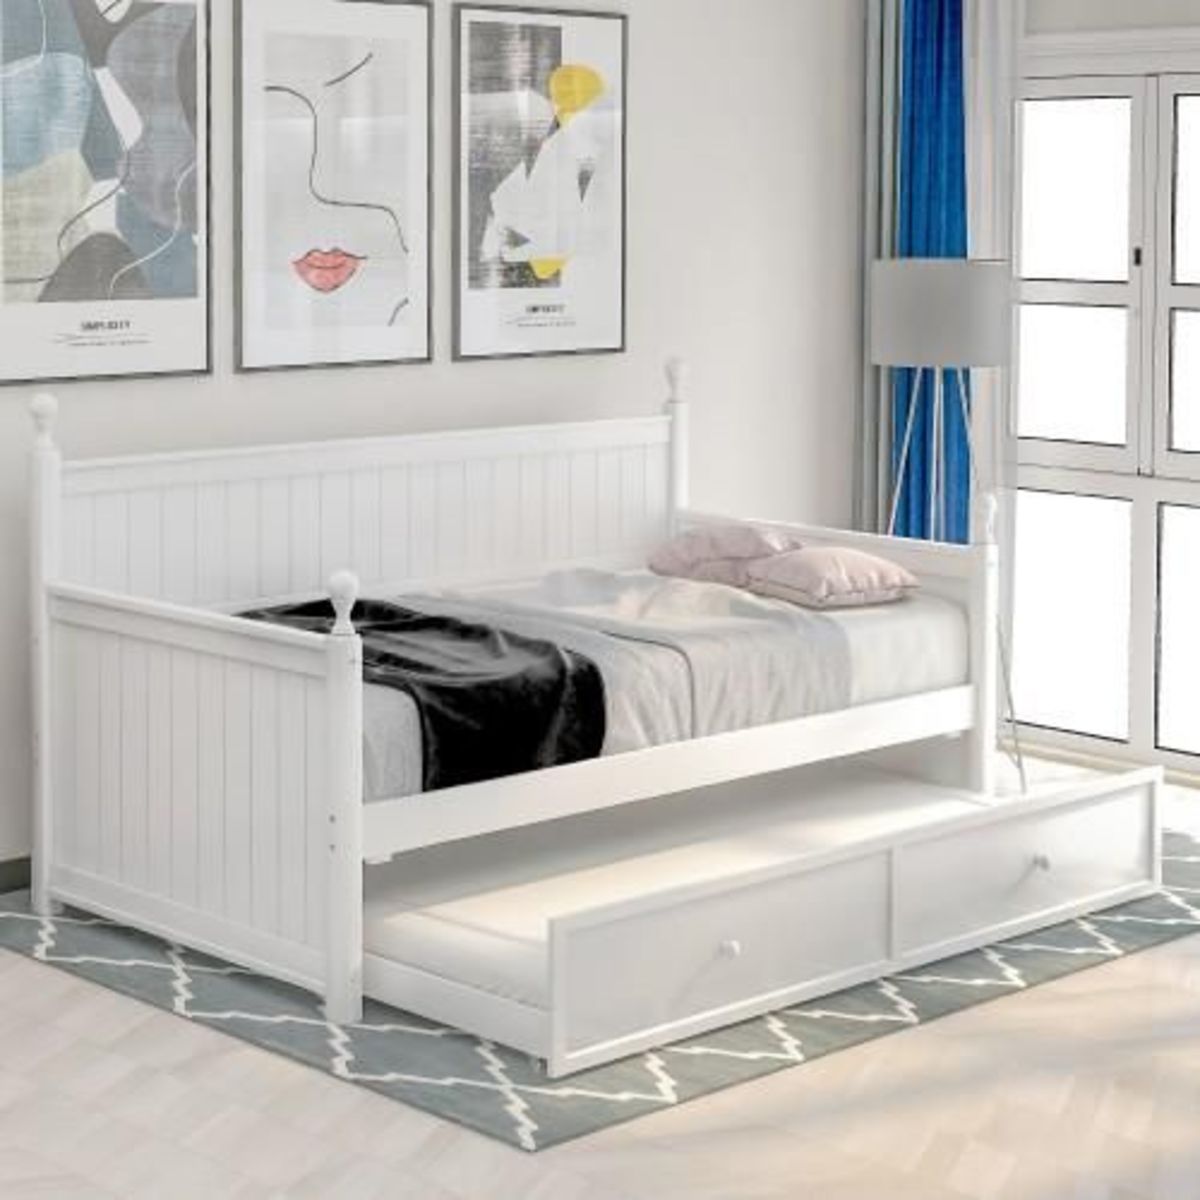 6-amazing-murphy-bed-design-ideas-for-small-space-bedrooms